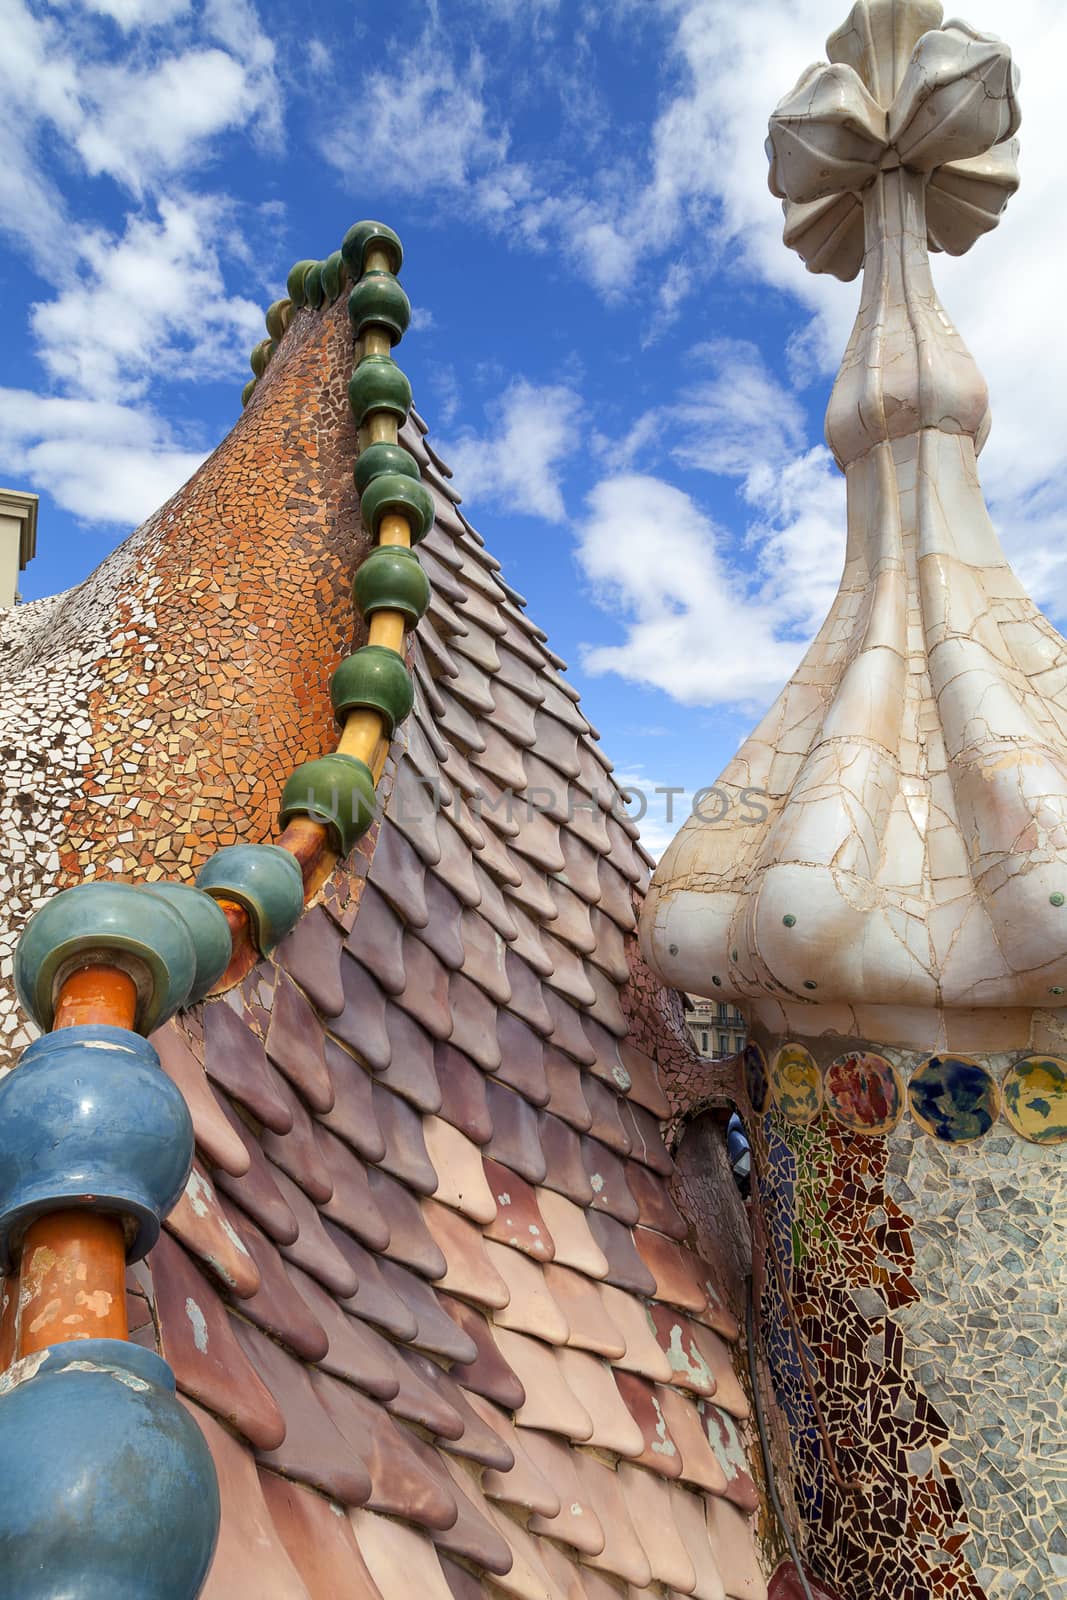 Barcelona, Spain - May 11,2016 : Casa Batllo,  housetop , details with ceramic mosaic. Building  redesigned in 1904 by Gaudi located in the center of Barcelona, it  is on the UNESCO World Heritage Site.